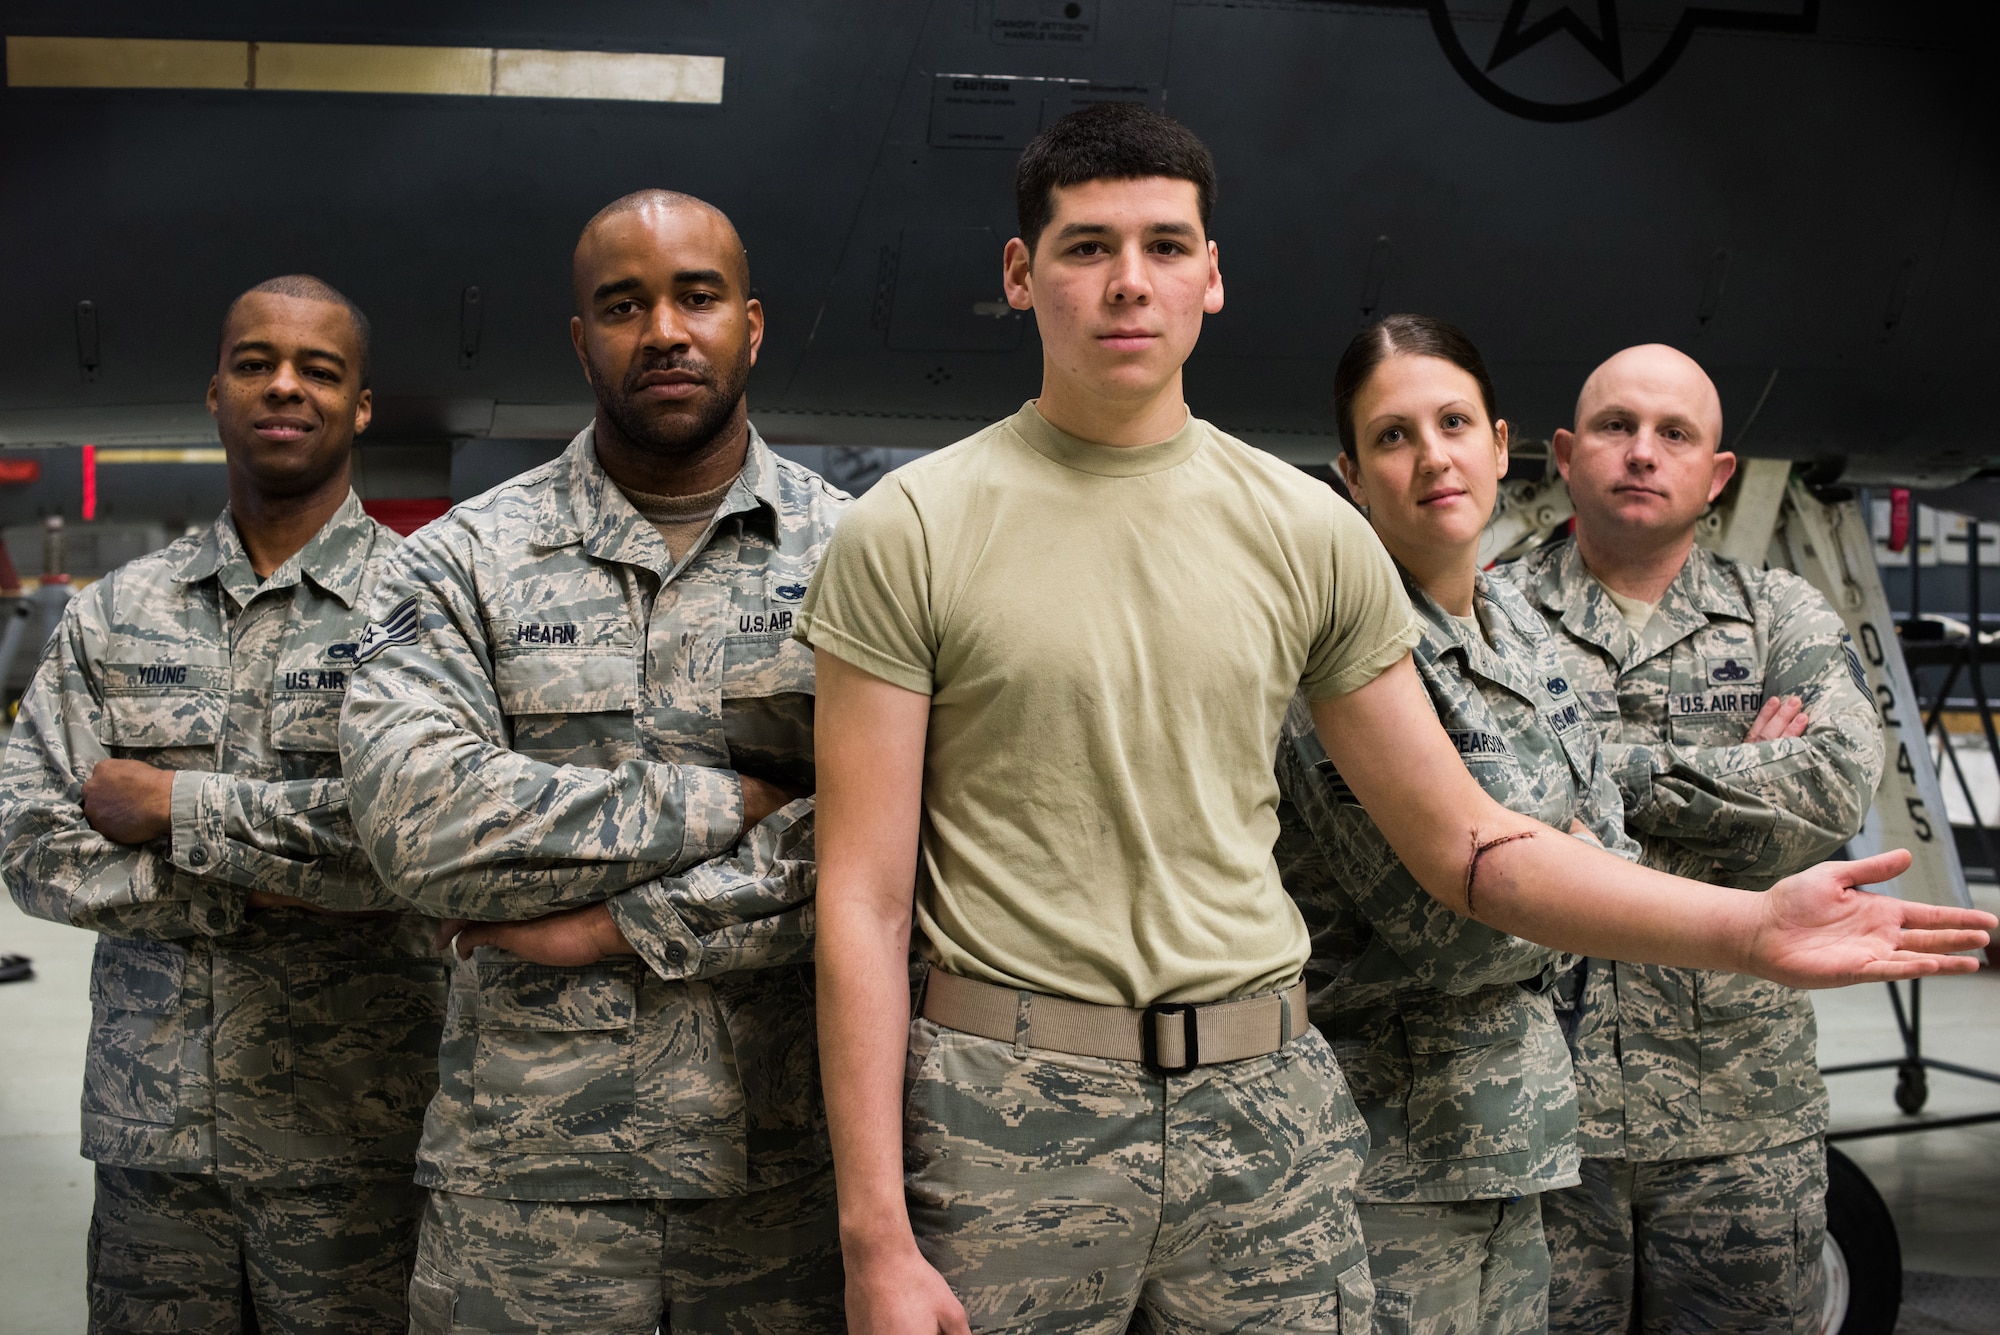 Airmen from the 366th Equipment Maintenance Squadron pose for a photo at Mountain Home Air Force Base, Idaho May 14, 2015. On April 2, Airman 1st Class Saul Vasquez (Center) tore his radial artery inside the belly of an F-15E Strike Eagle. Without the quick response and first aid training of squadron personnel, he may not be alive today. (U.S. Air Force photo by Airman Connor J. Marth)